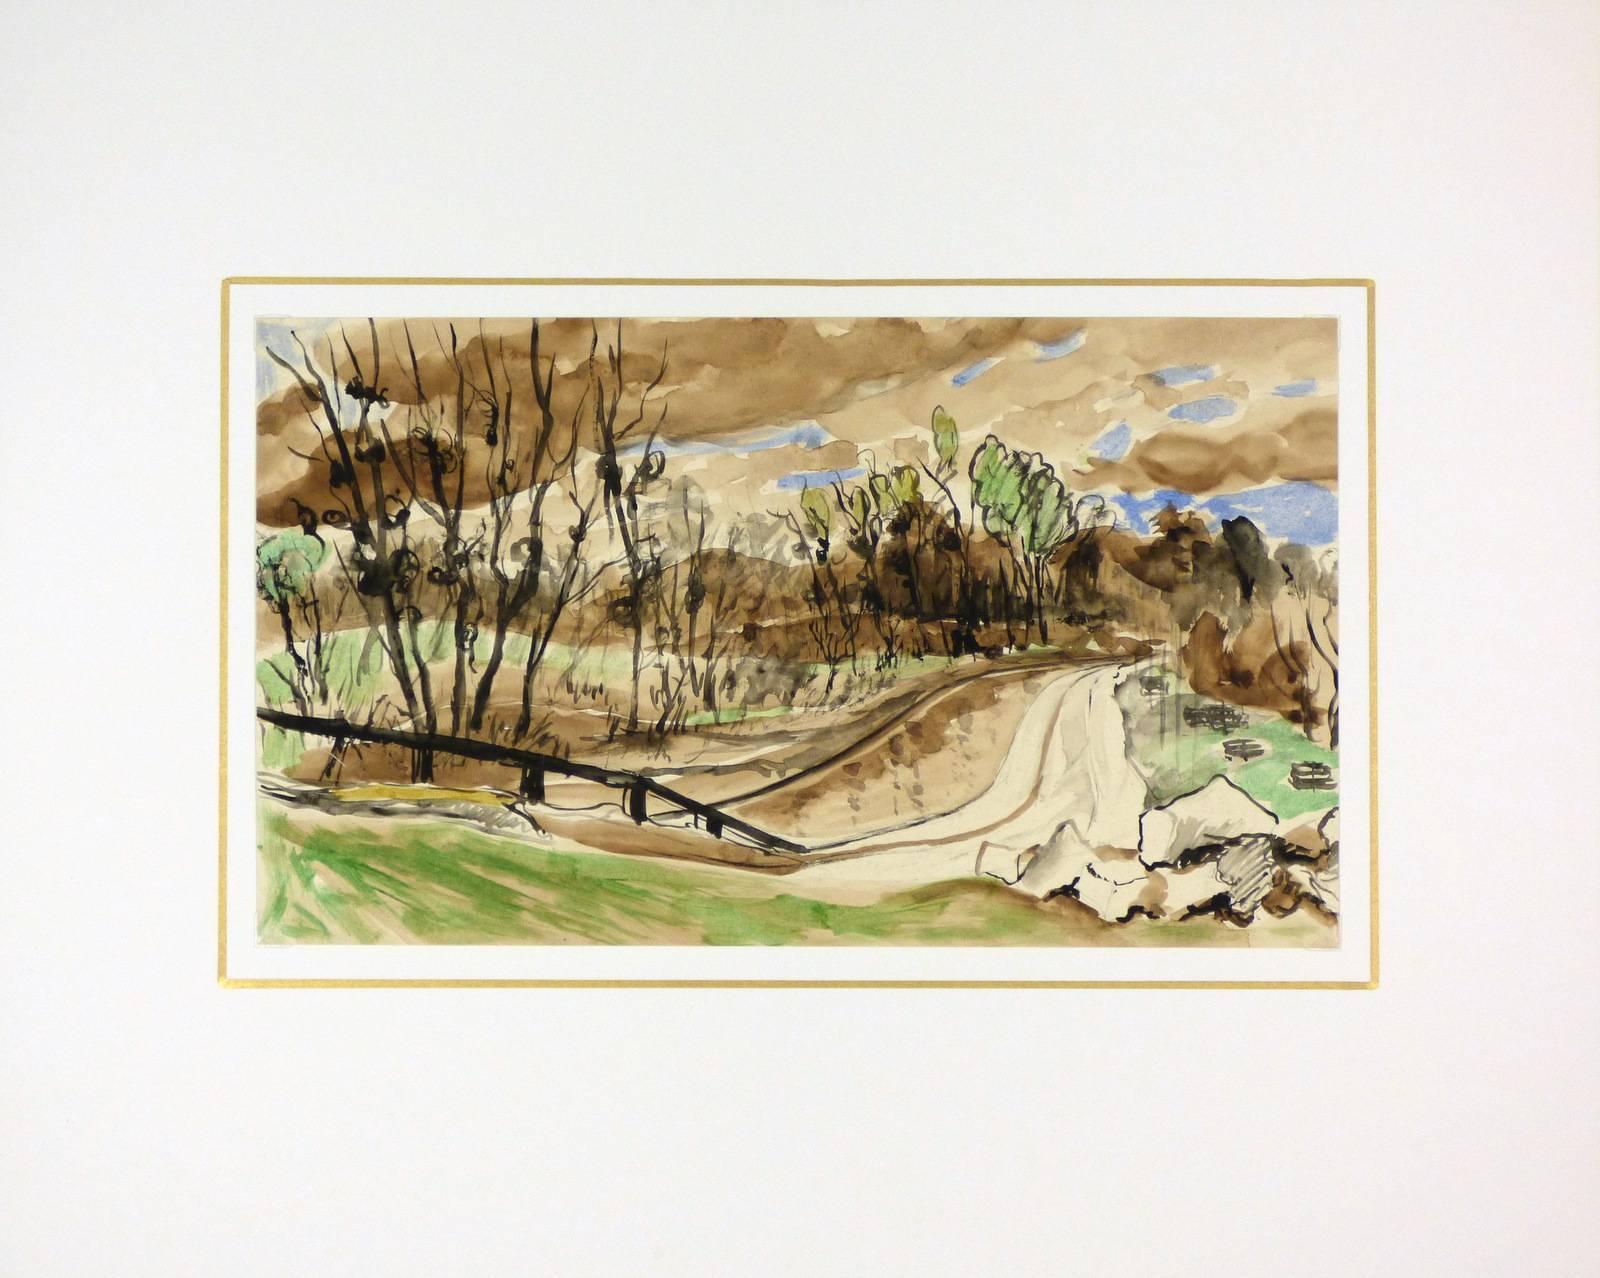 Browns and greens intermingle in this French watercolor of a country road and surrounding landscape, circa 1950. Patches of soft blue break through the clouds on the horizon, as the sinuous road and bending trees lend a sense of movement to the